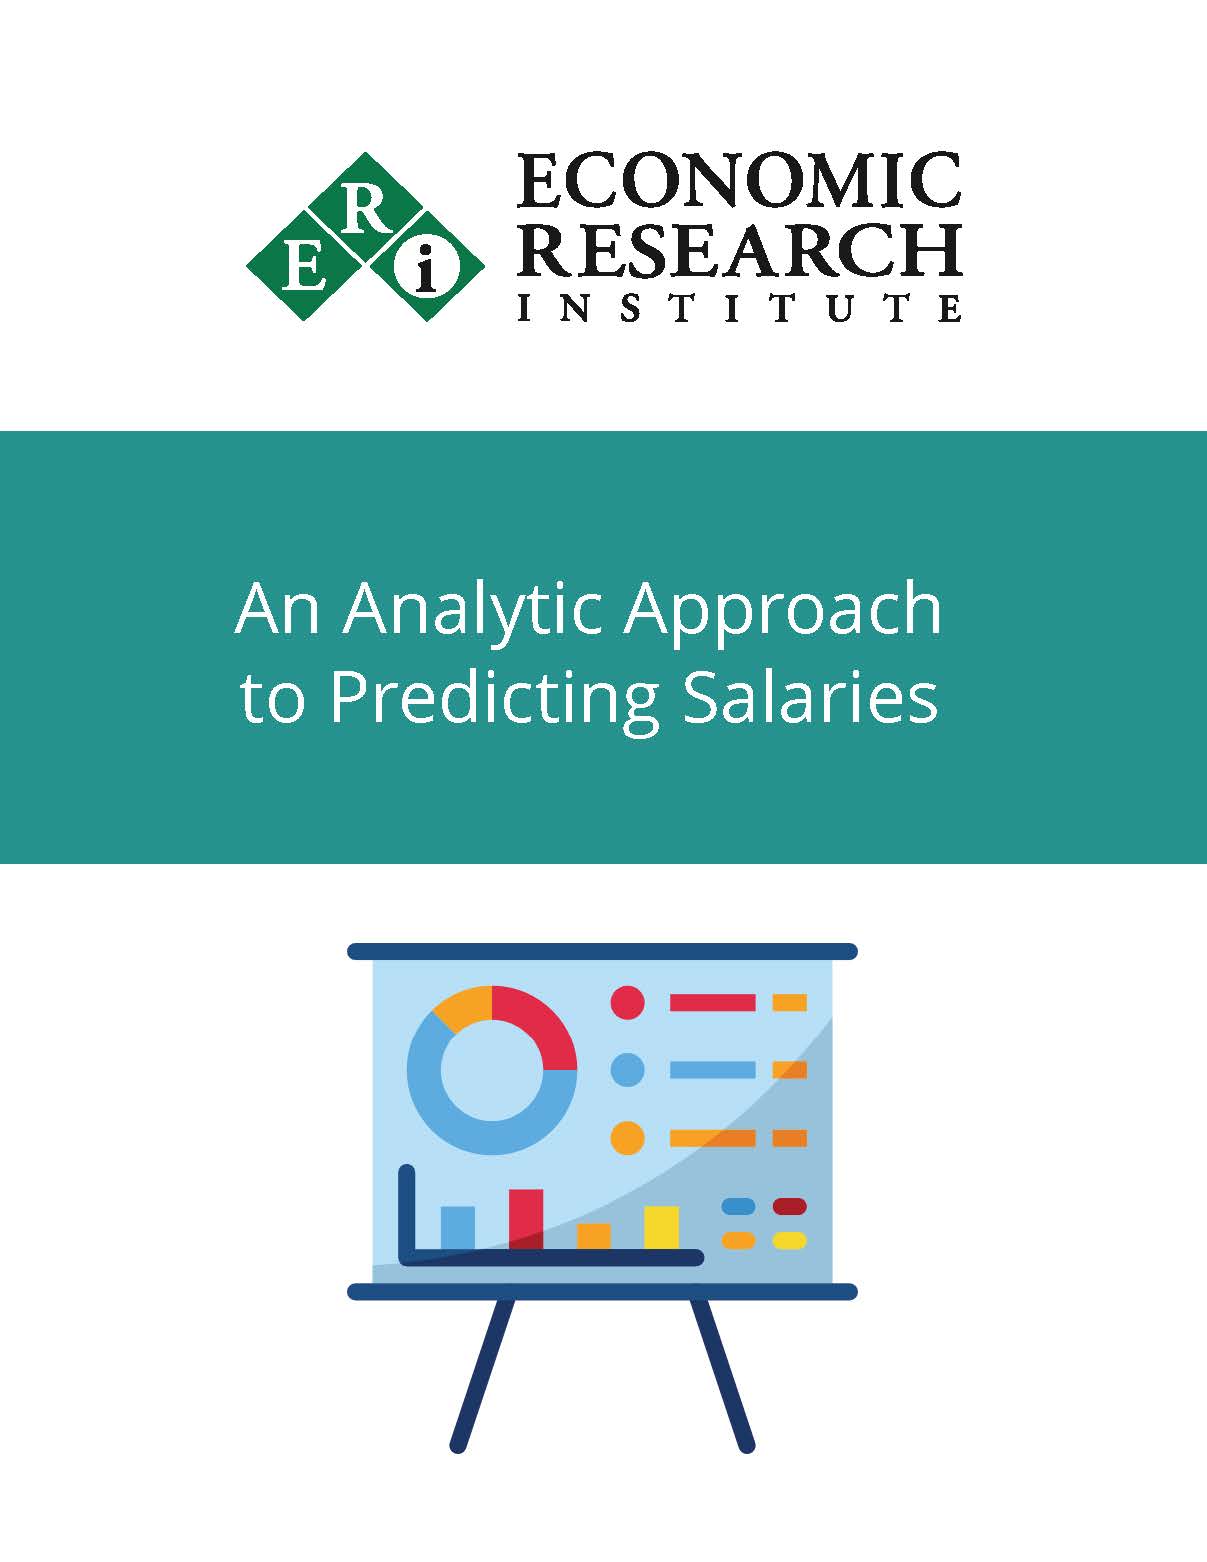 An Analytic Approach to Predicting Salaries_Page_1